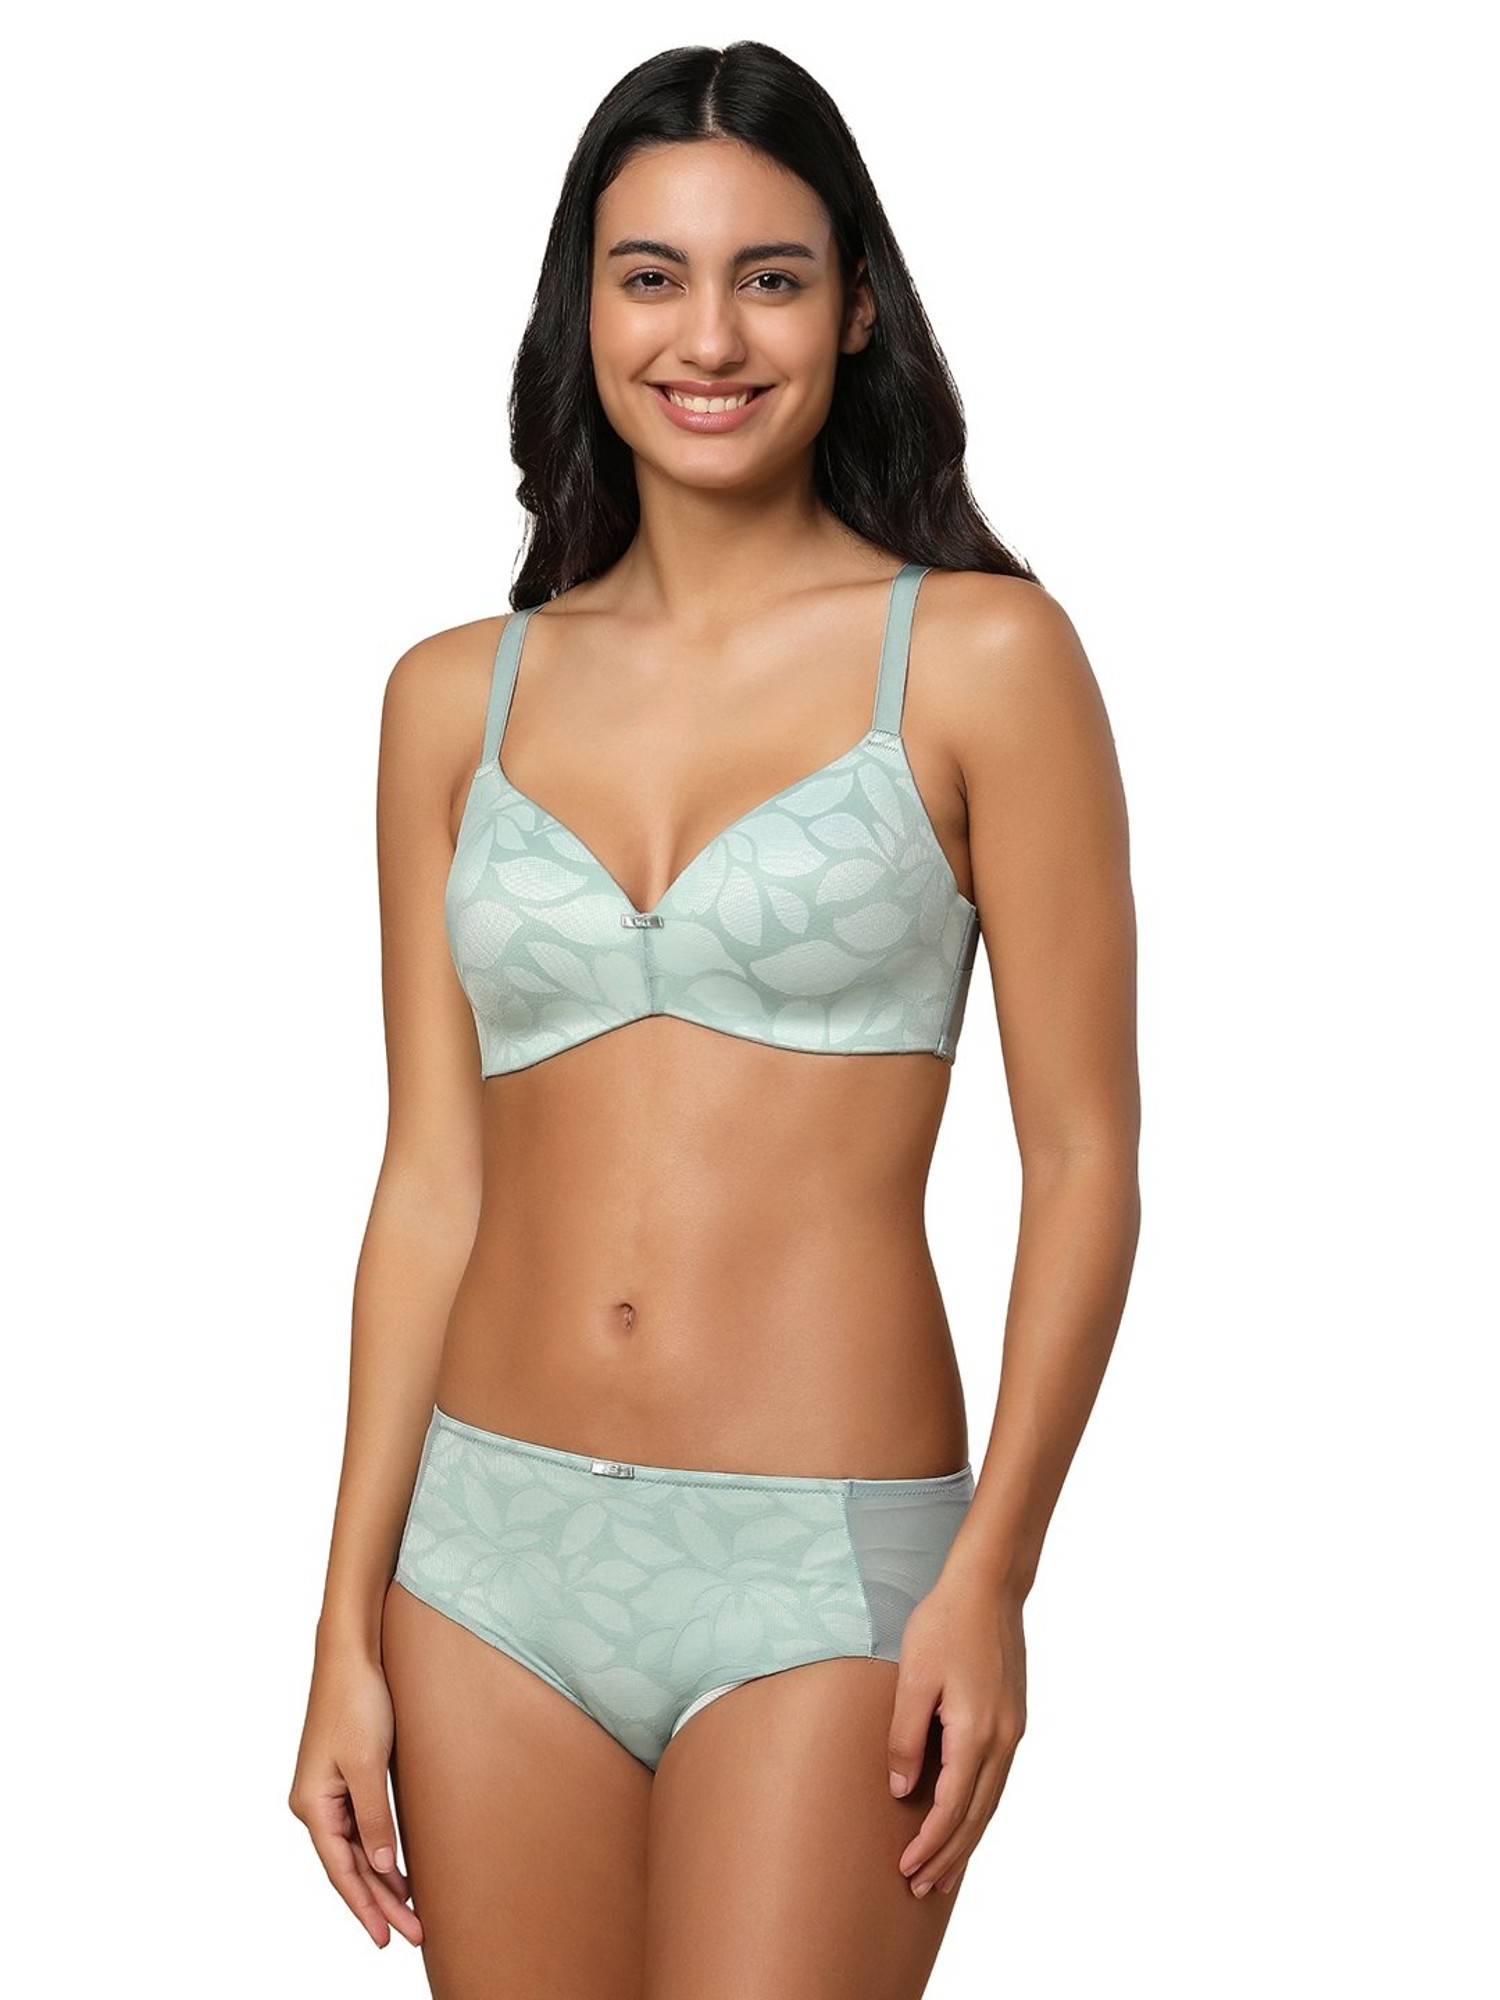 Buy Triumph Green Floral Hipster Panty for Women's Online @ Tata CLiQ